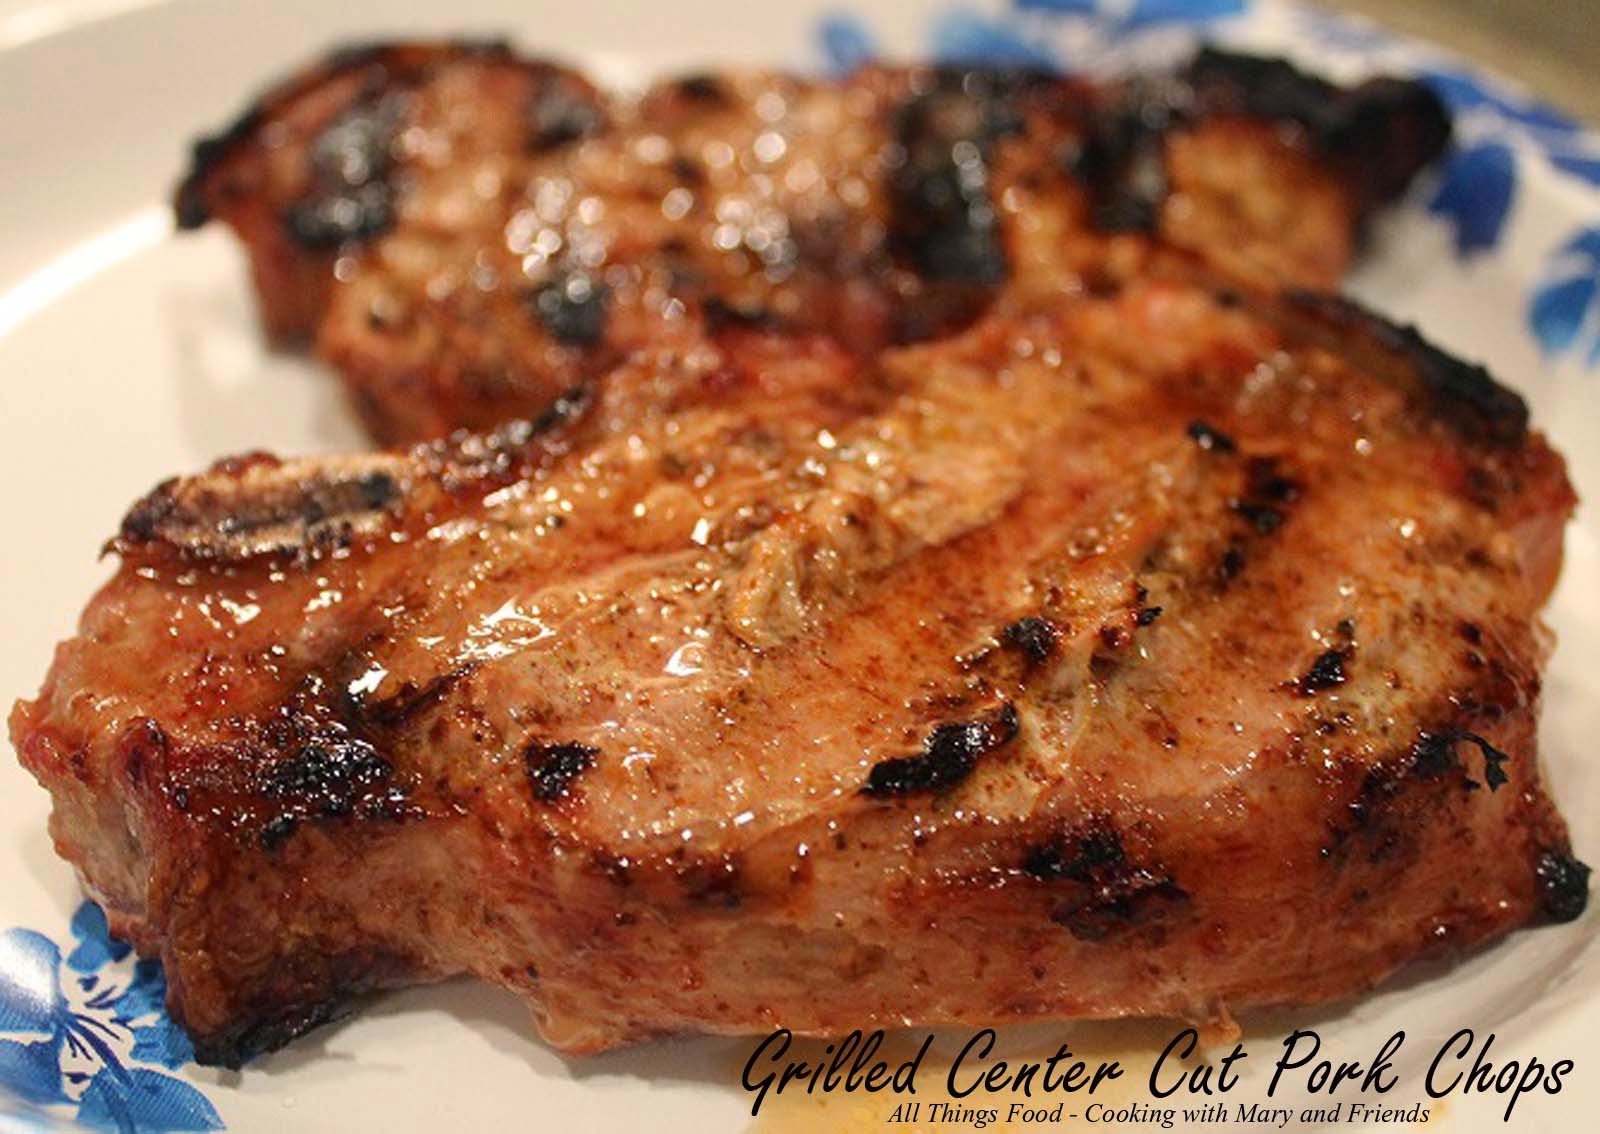 Cooking With Mary and Friends: Grilled Center Cut Pork Chops